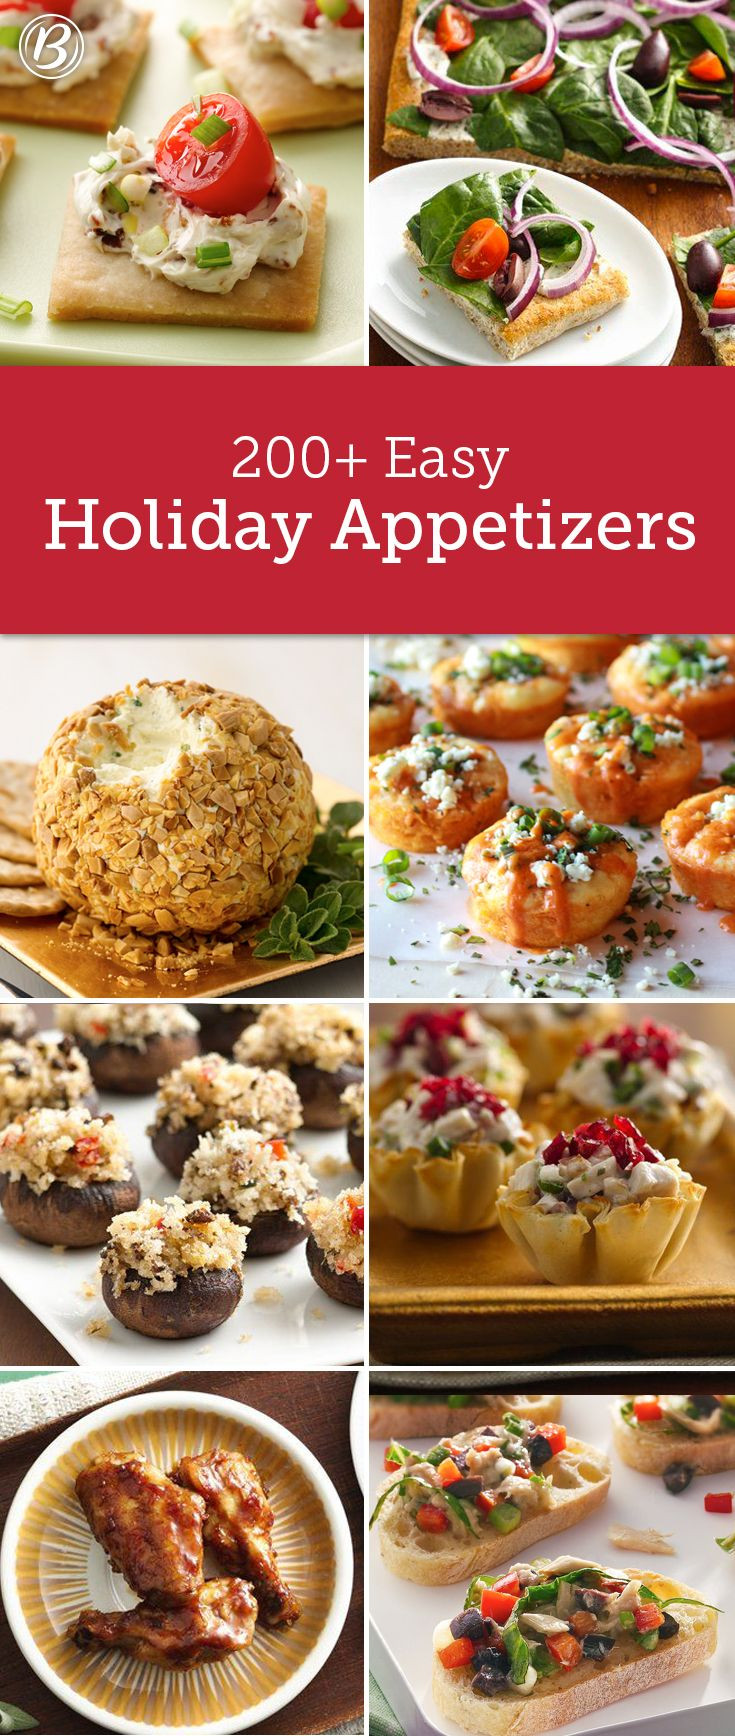 Christmas Appetizers Pinterest
 48 best Easy Holiday Appetizers images on Pinterest